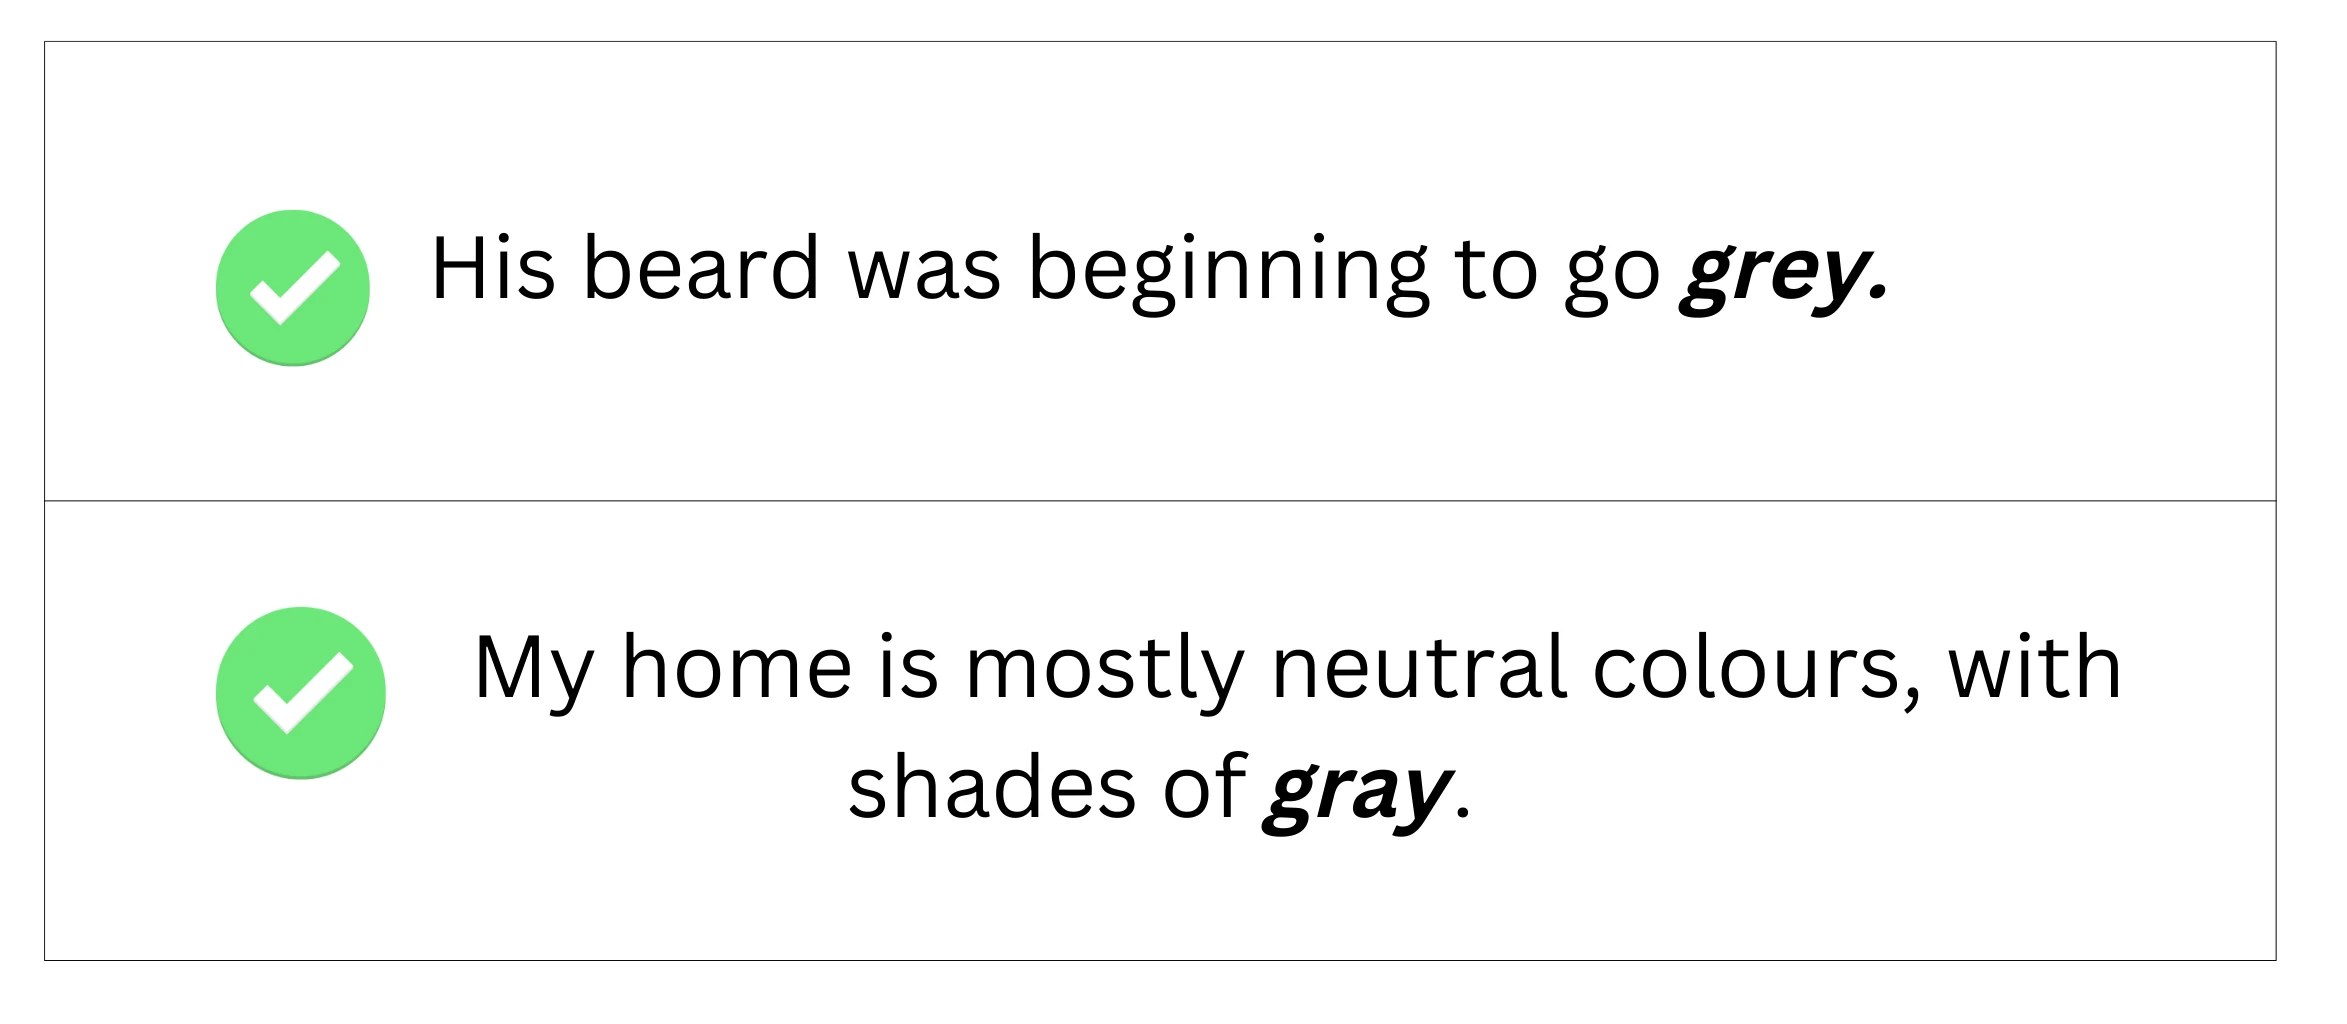 Gray vs. Grey: How to Choose the Right Word